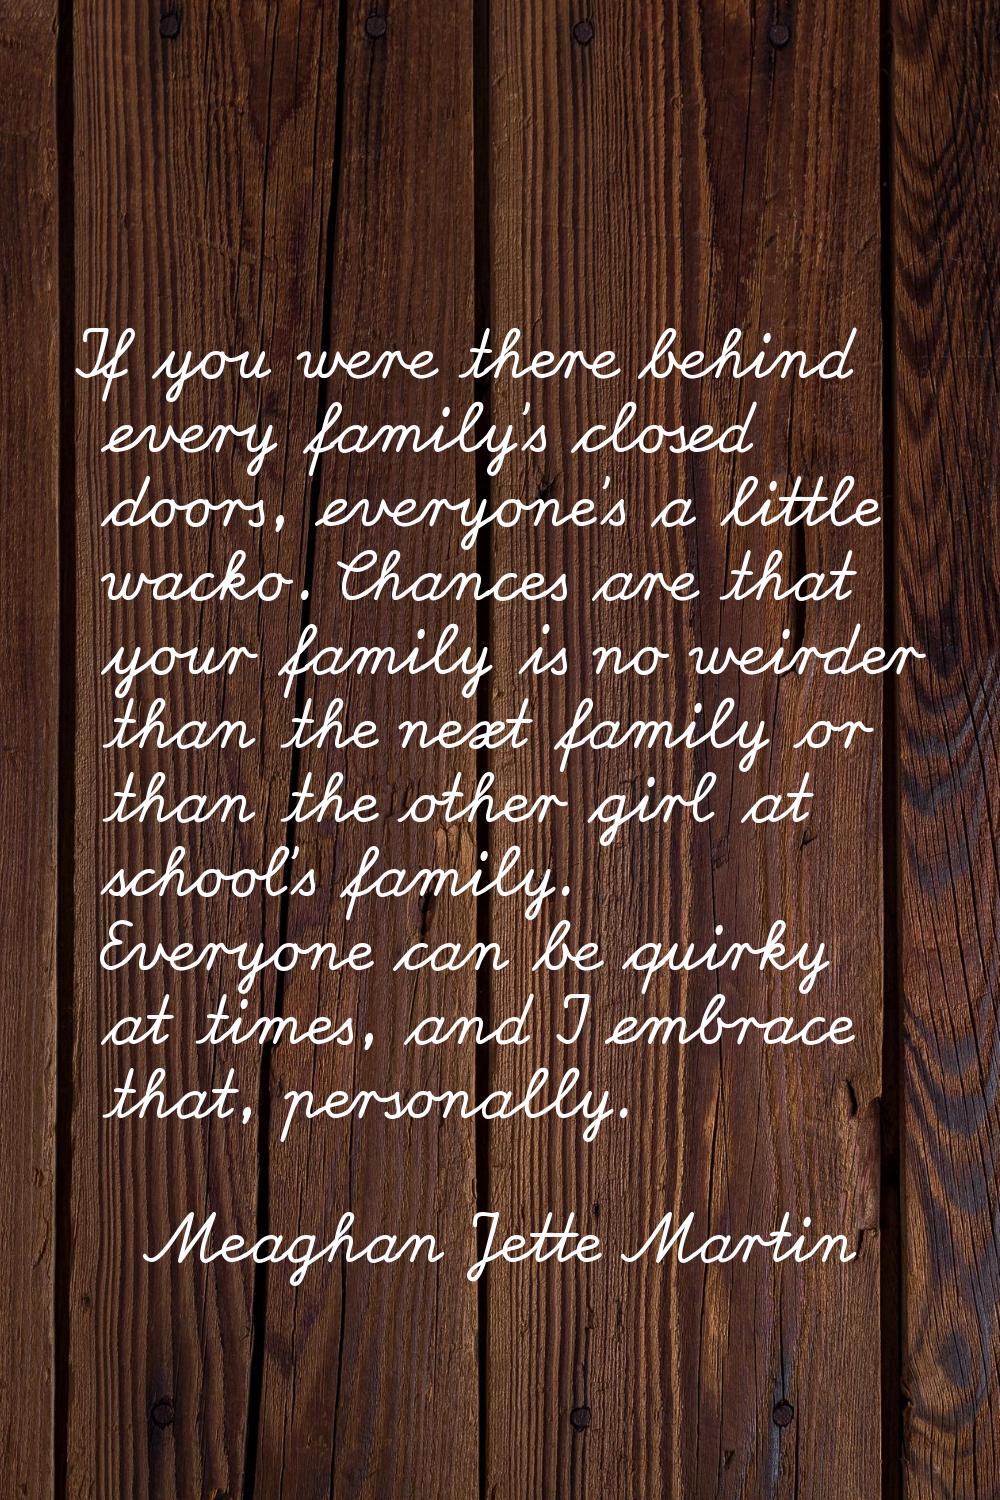 If you were there behind every family's closed doors, everyone's a little wacko. Chances are that y